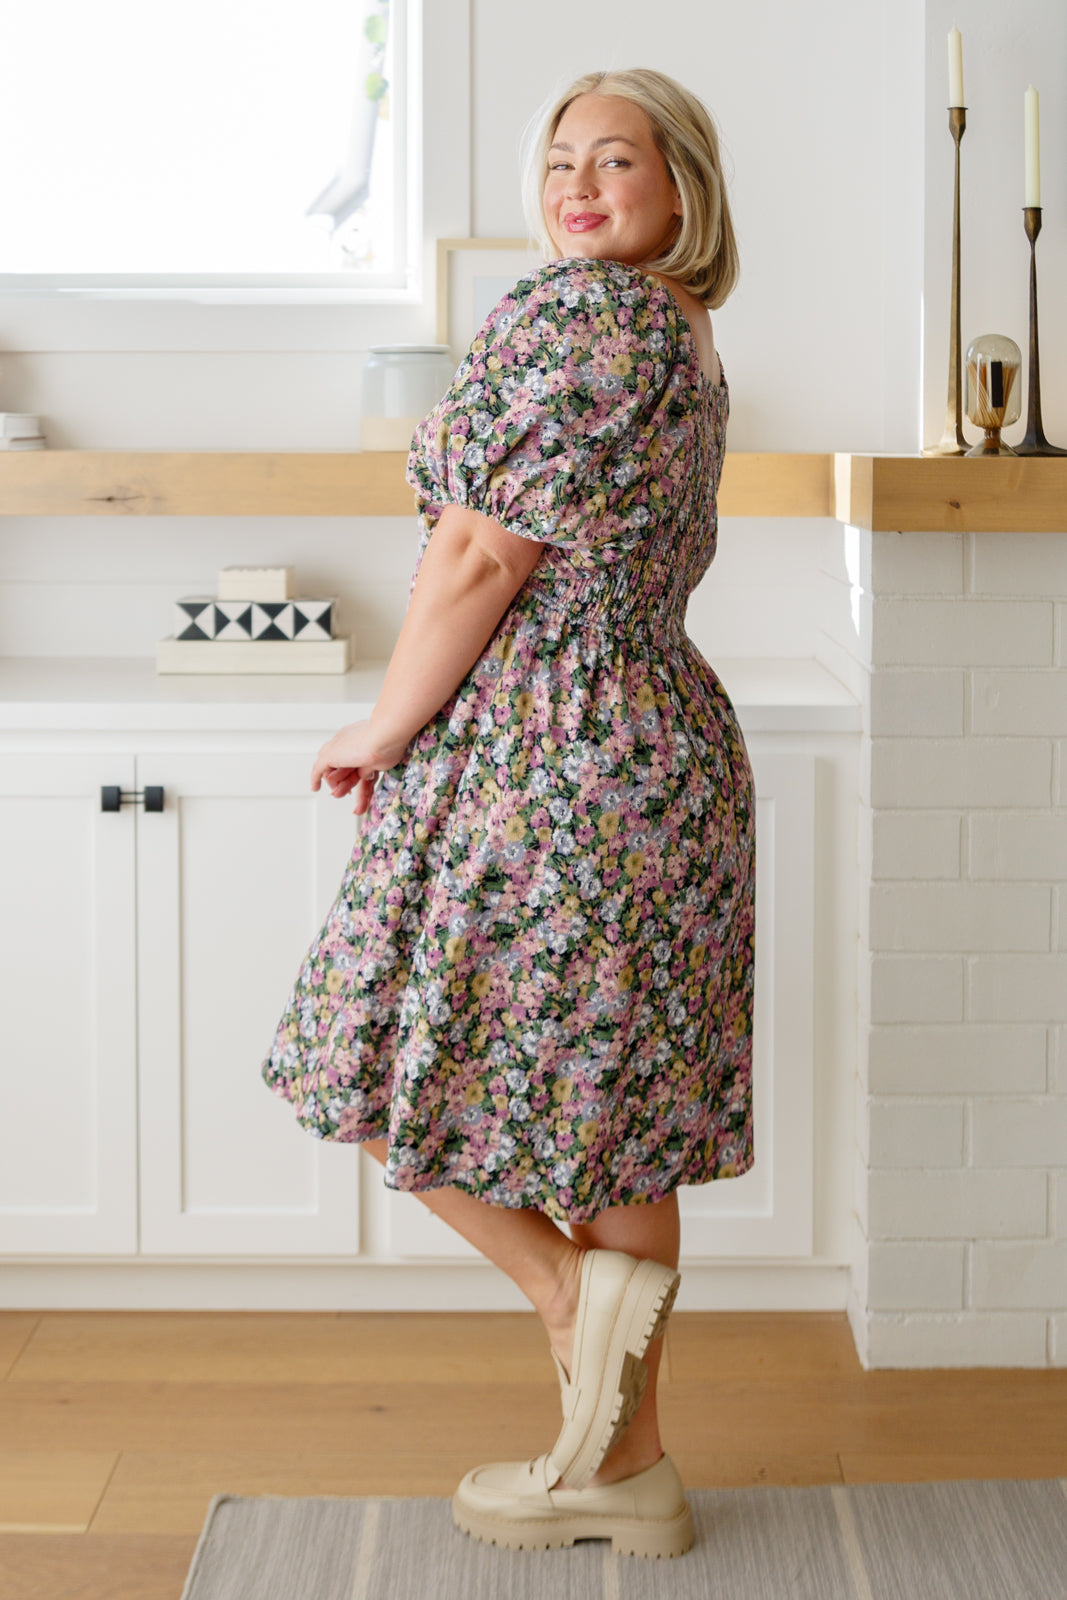 Excellence Without Effort Floral Dress - Three Bears Boutique